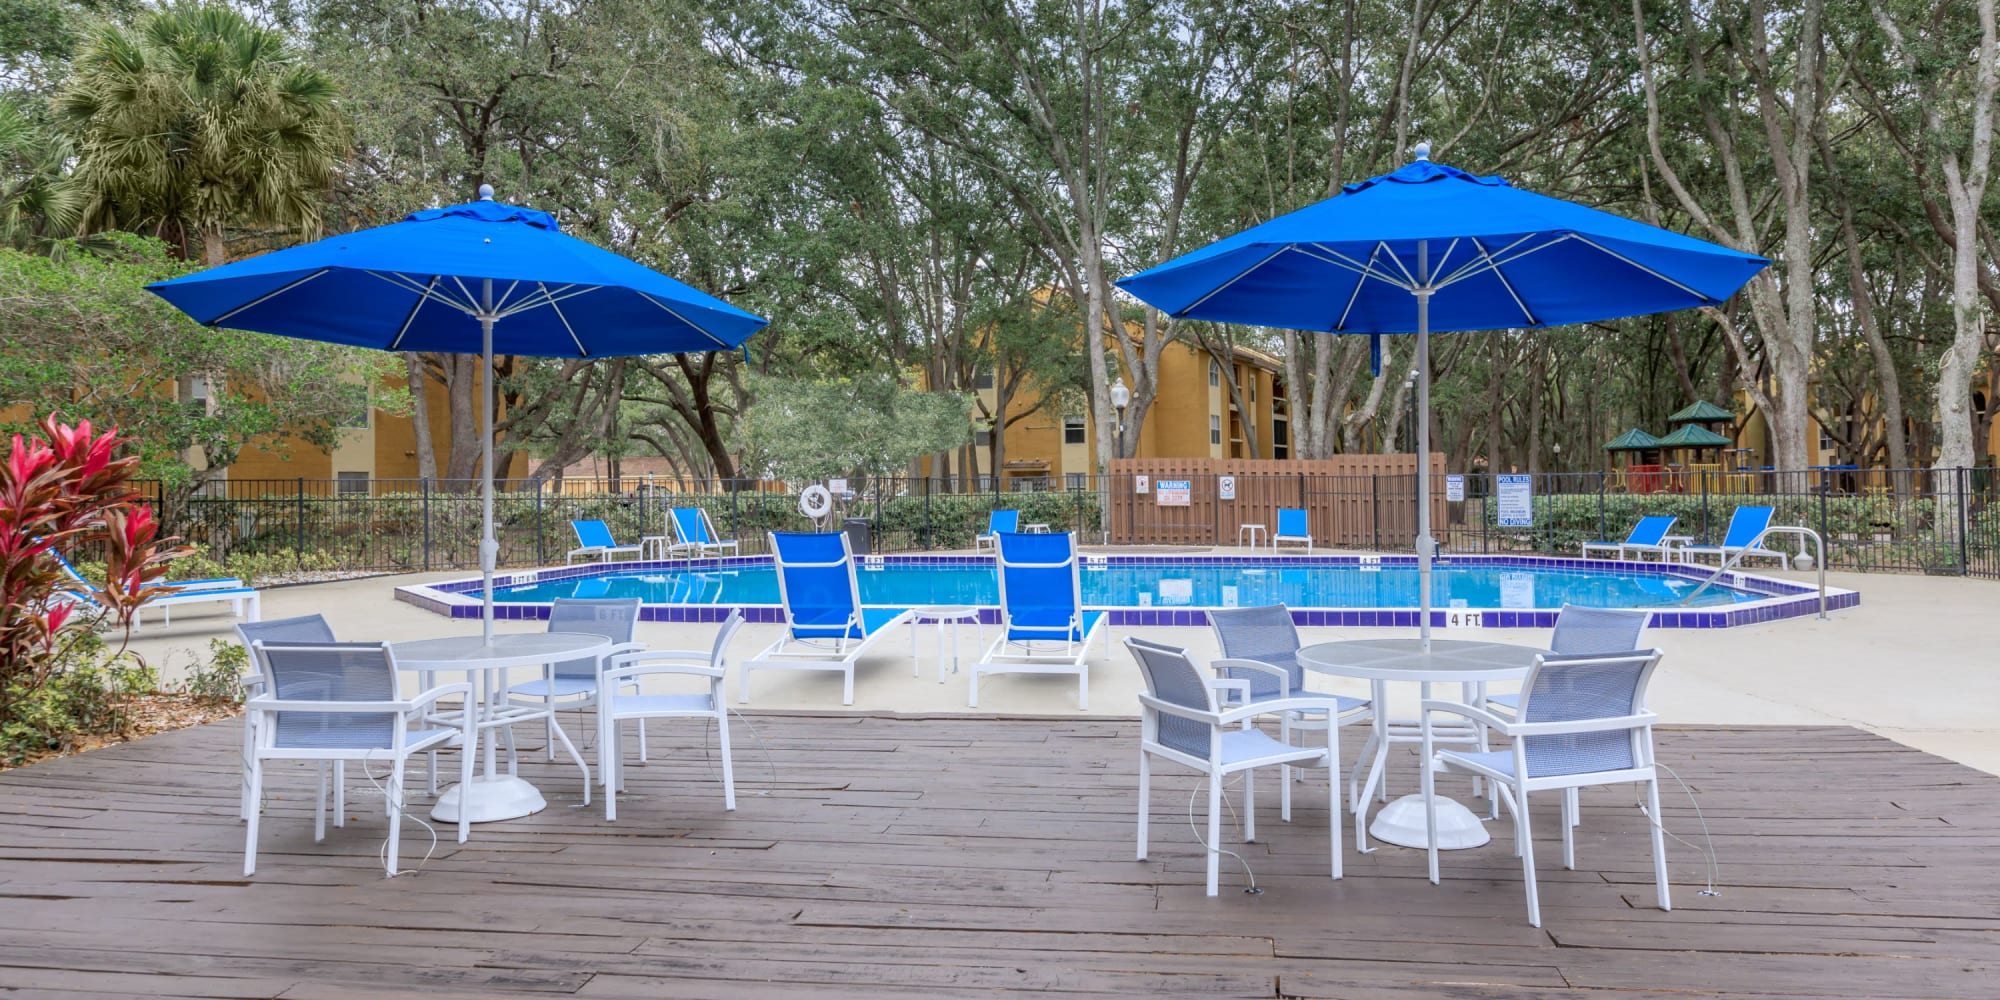 Picnic area by the pool at Images Condominiums in Kissimmee, Florida